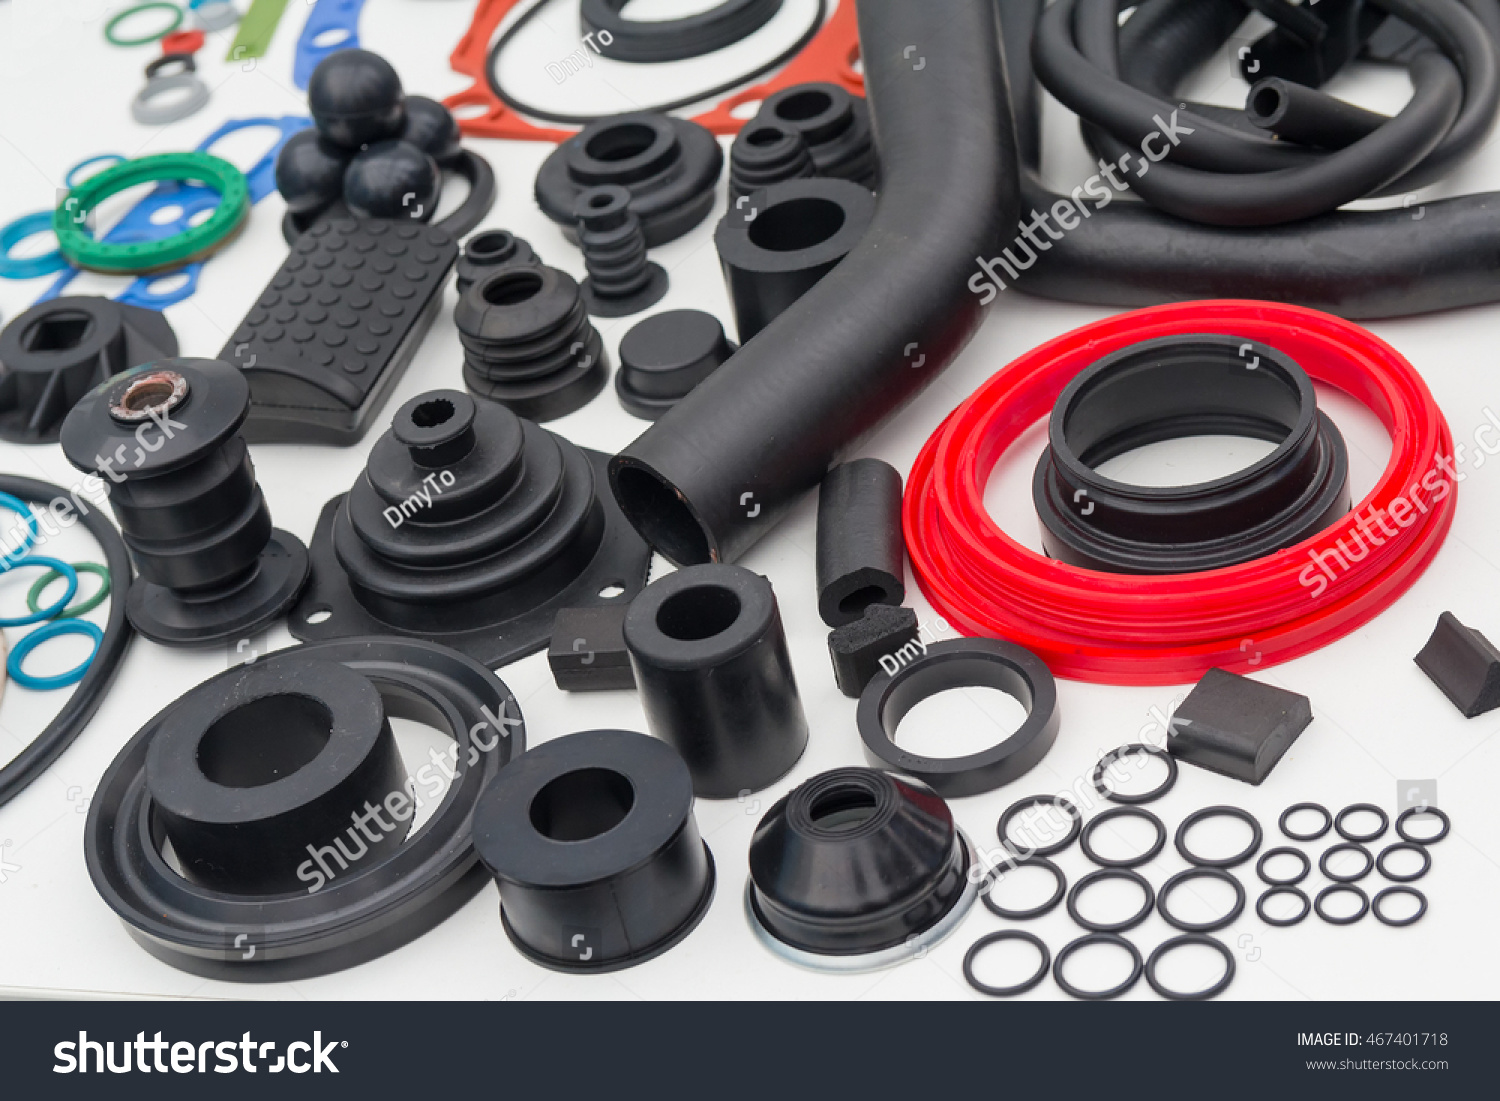 Various rubber products and sealing products at the exhibition stand. Industry #467401718